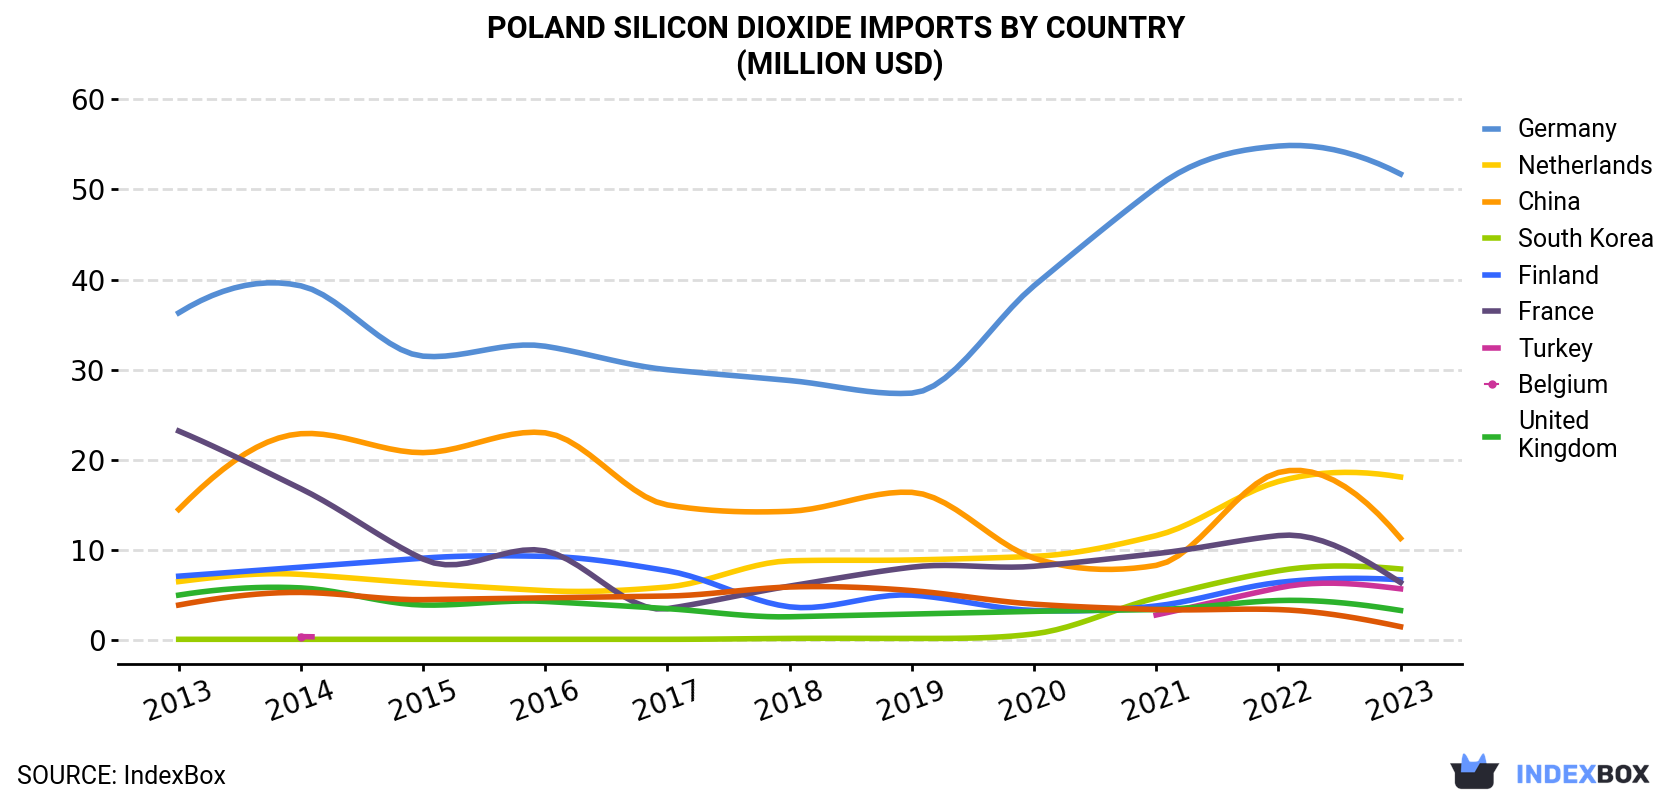 Poland Silicon Dioxide Imports By Country (Million USD)